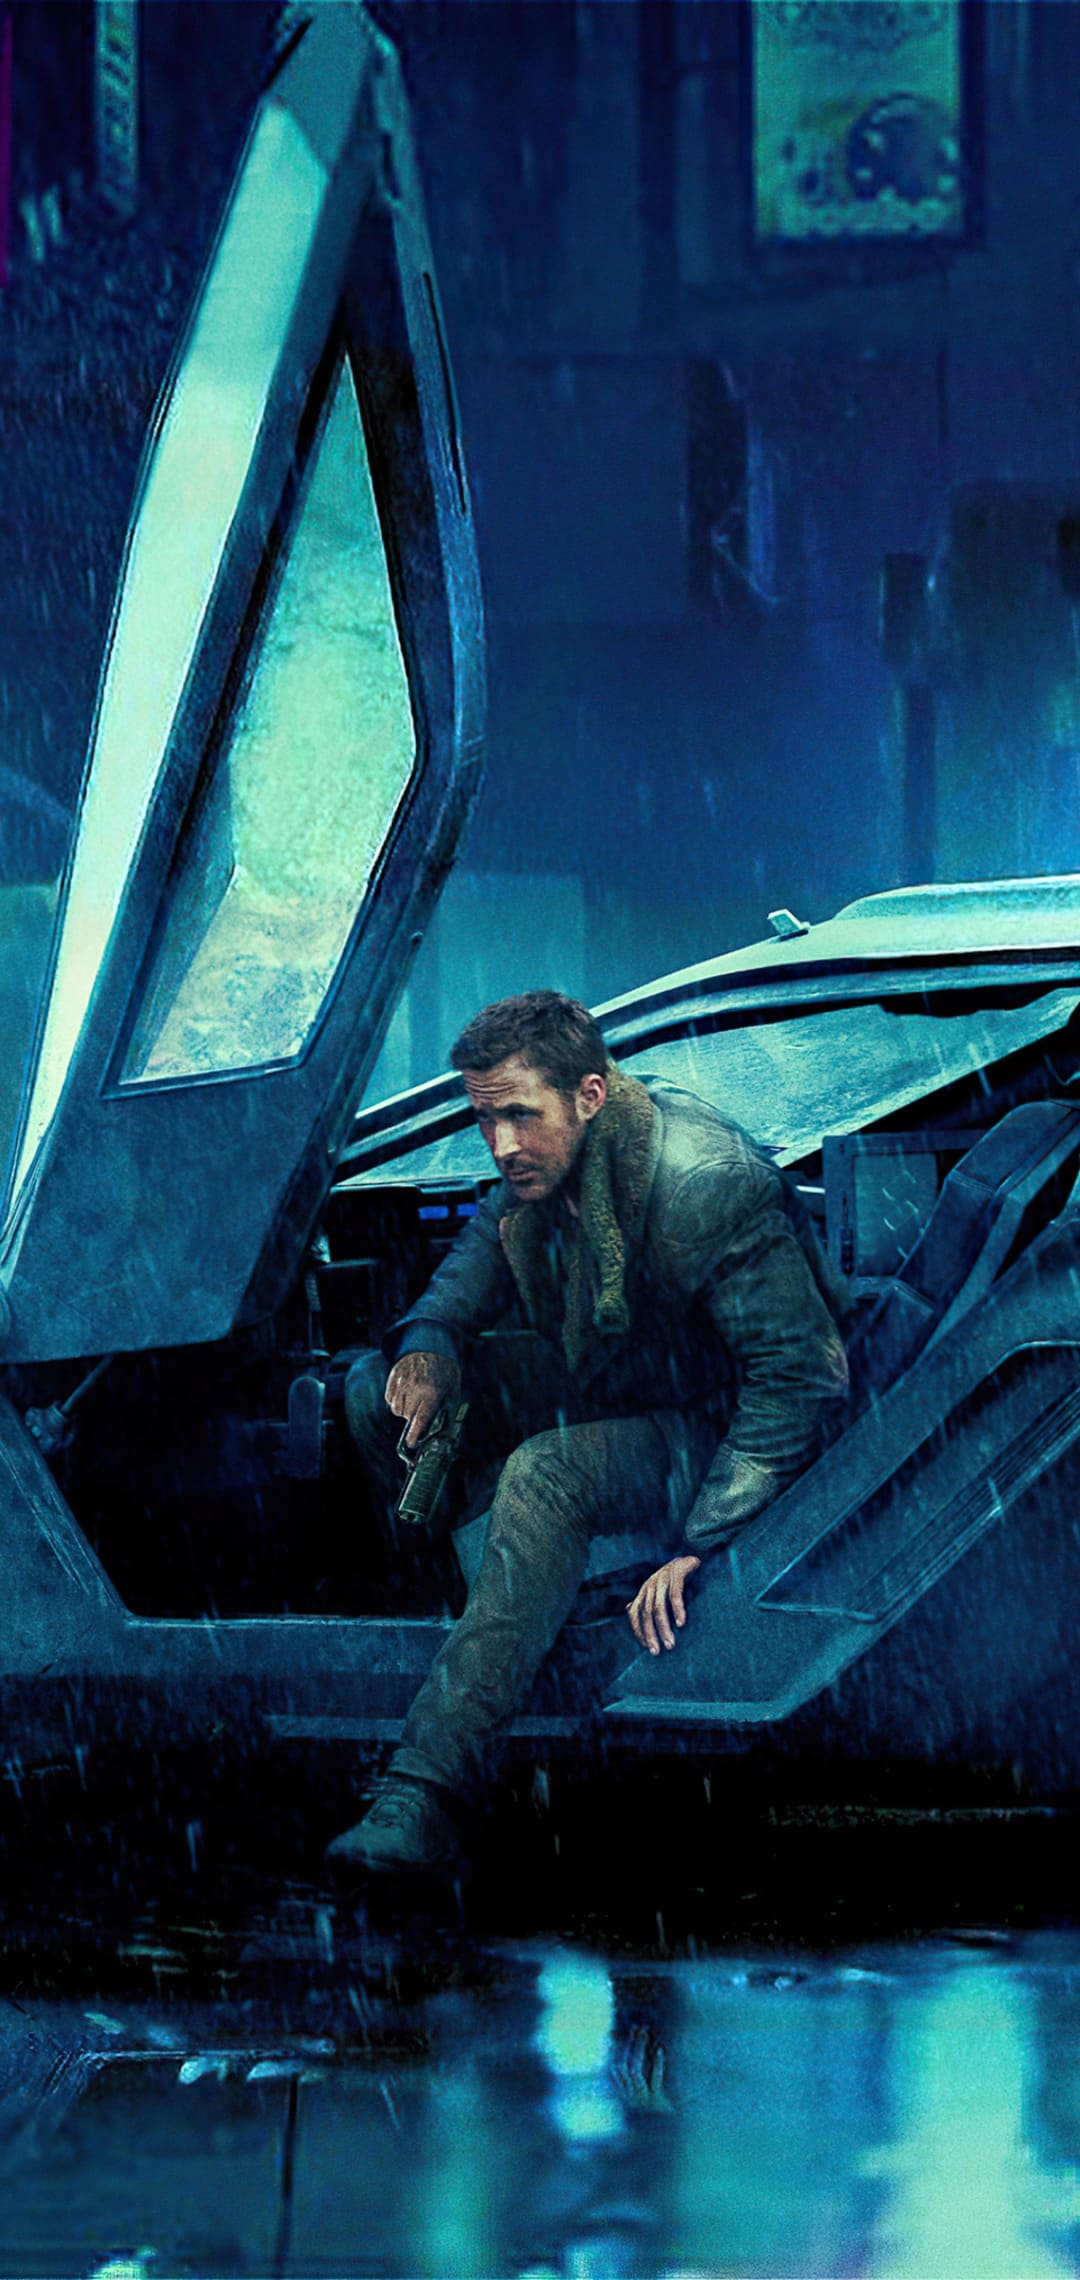 Best Blade Runner 2049 wallpapers, Download 4K HD, Futuristic theme, Memorable characters, 1080x2280 HD Phone